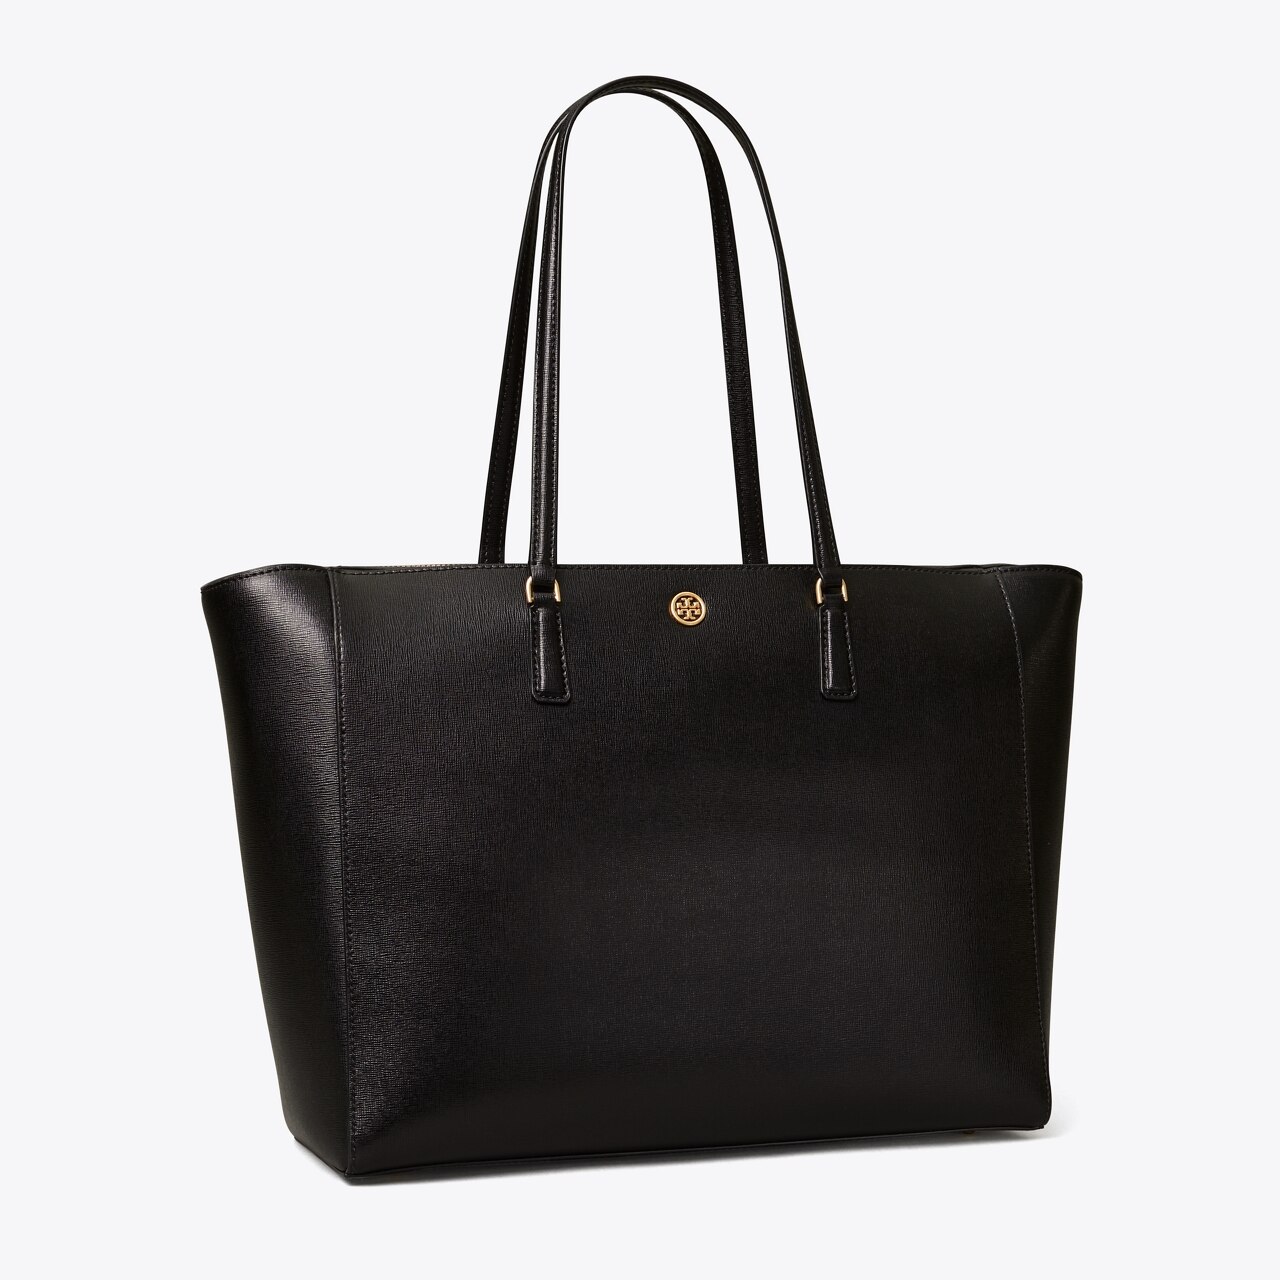 Tory Burch Robinson Leather Tote